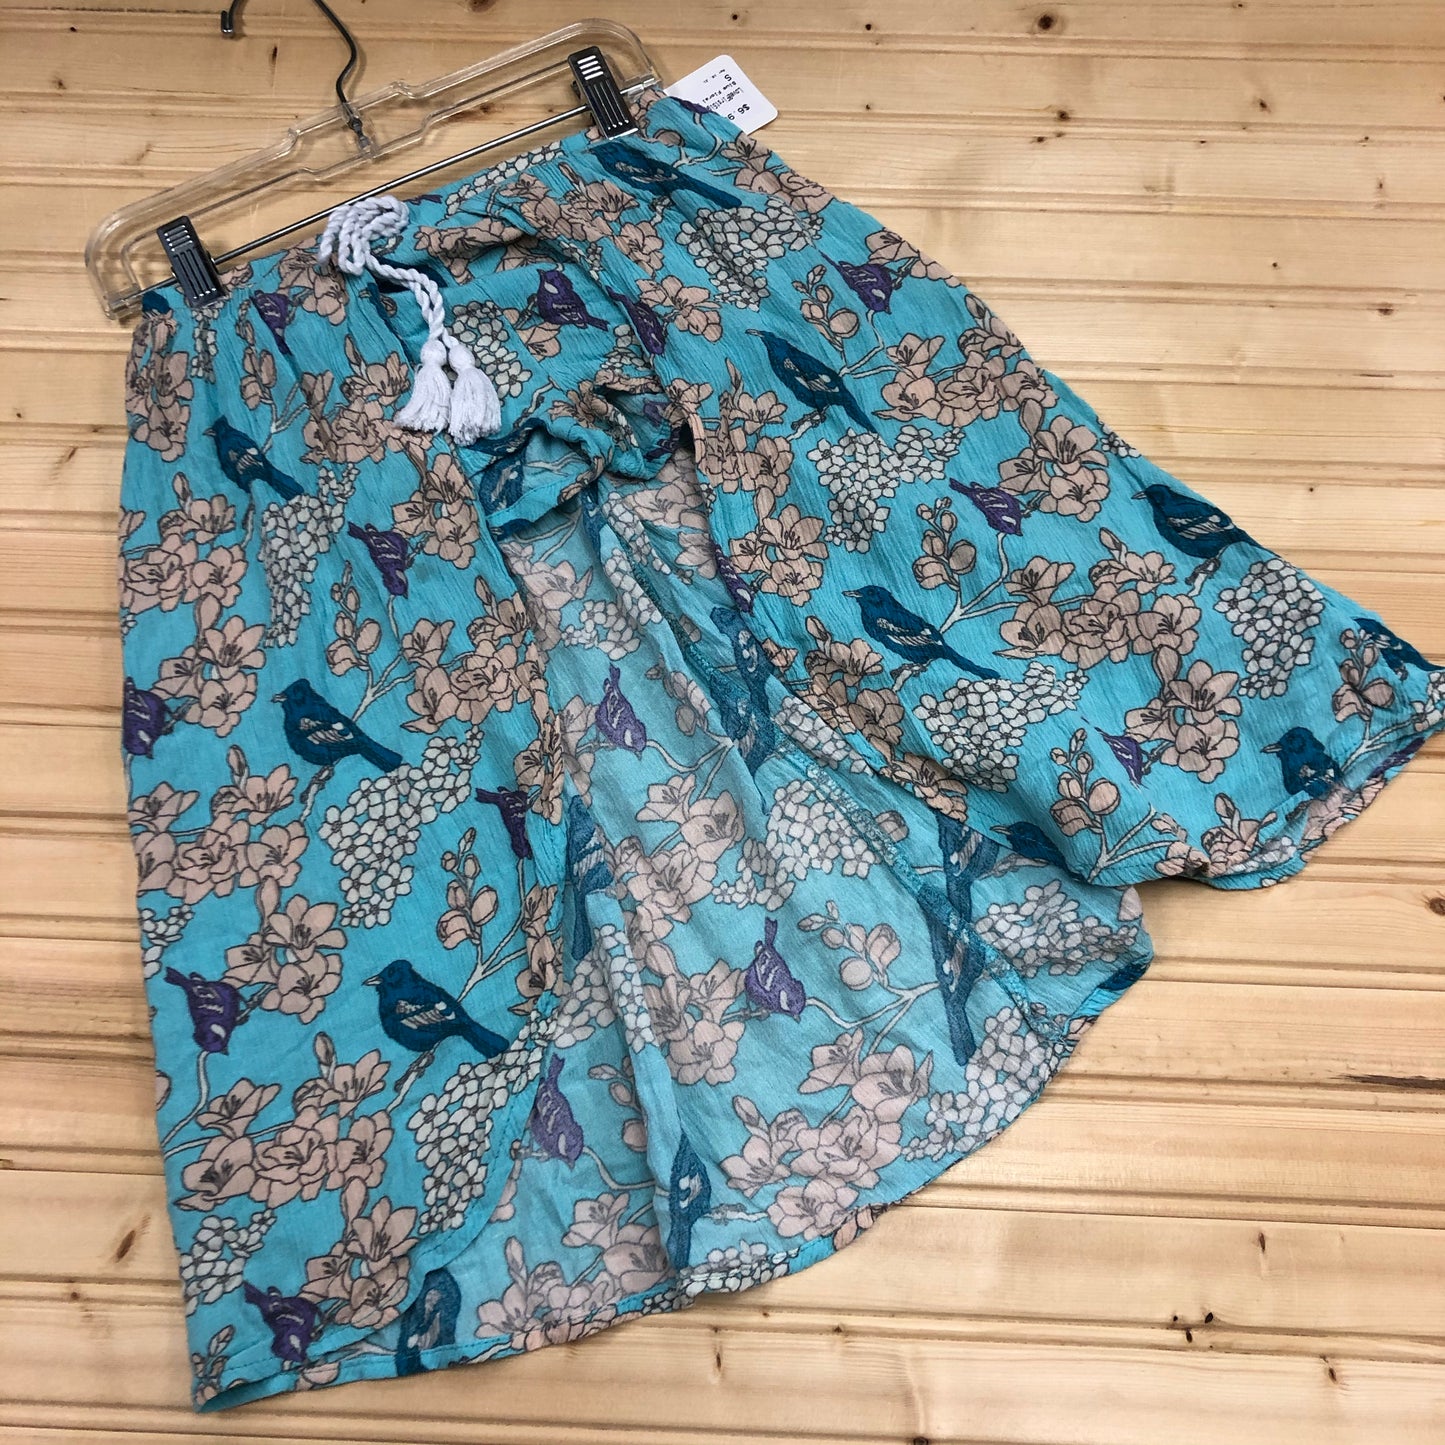 Blue Floral Shorts w/ Skirt